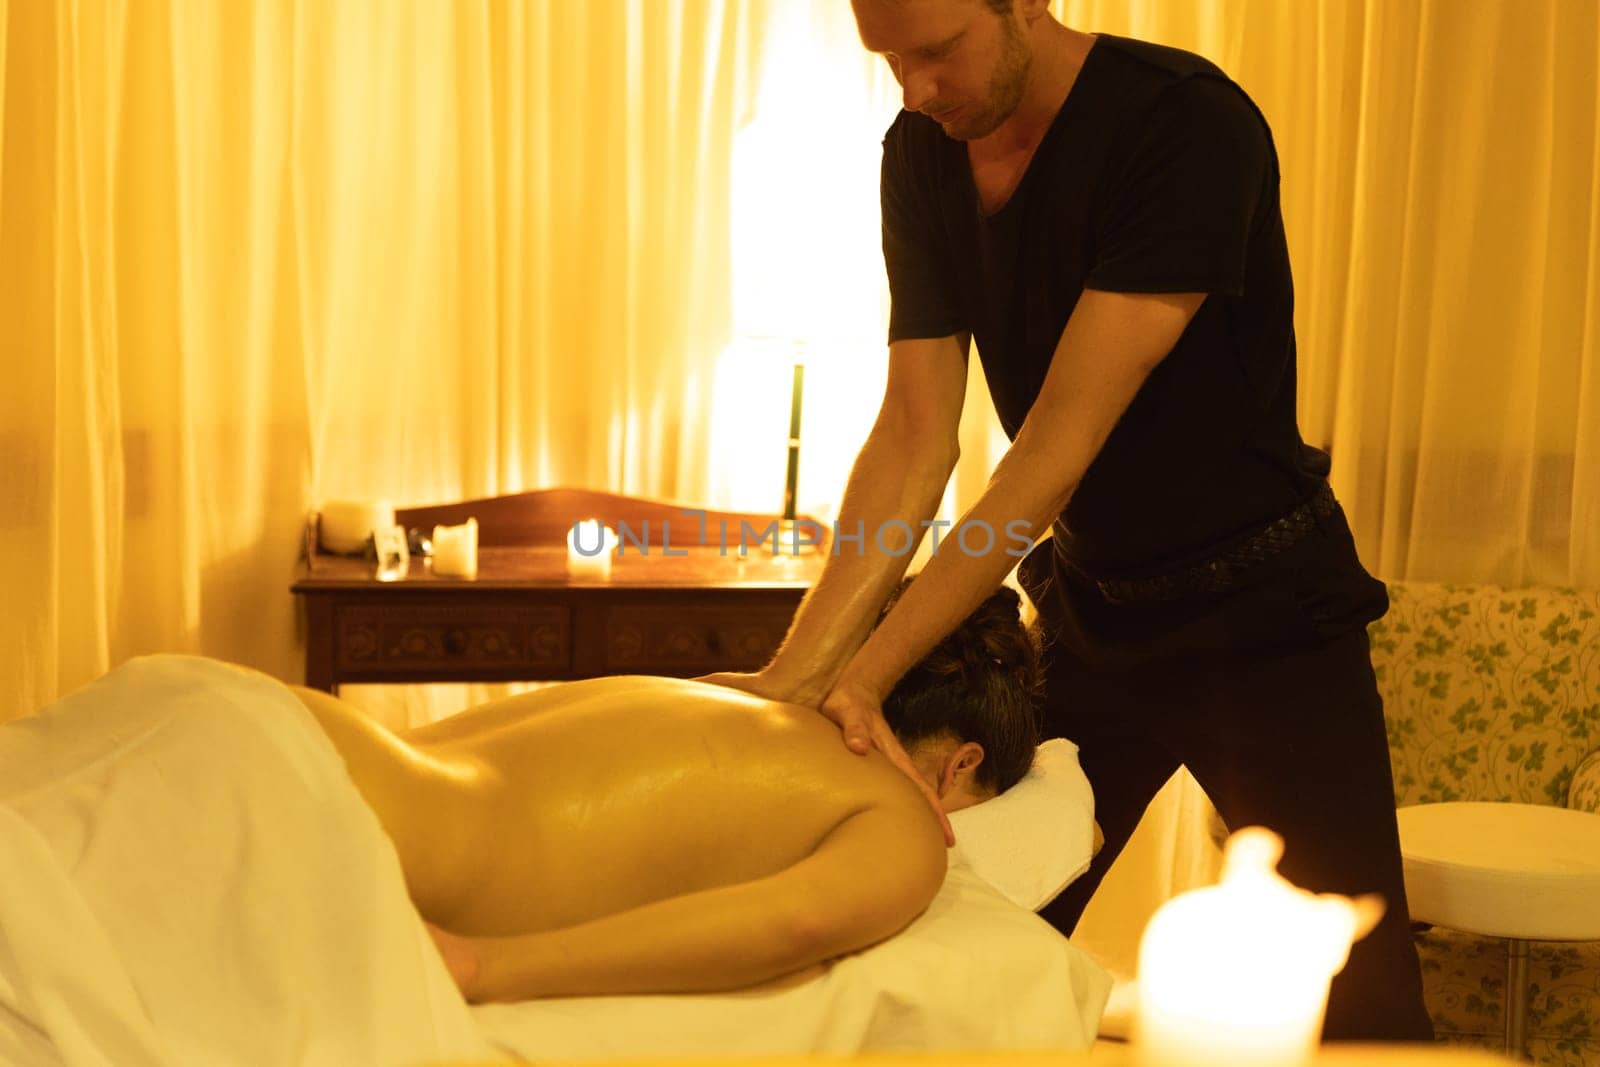 Massage session in SPA salon - a man massaging the upper area of bare back of a woman. Mid shot